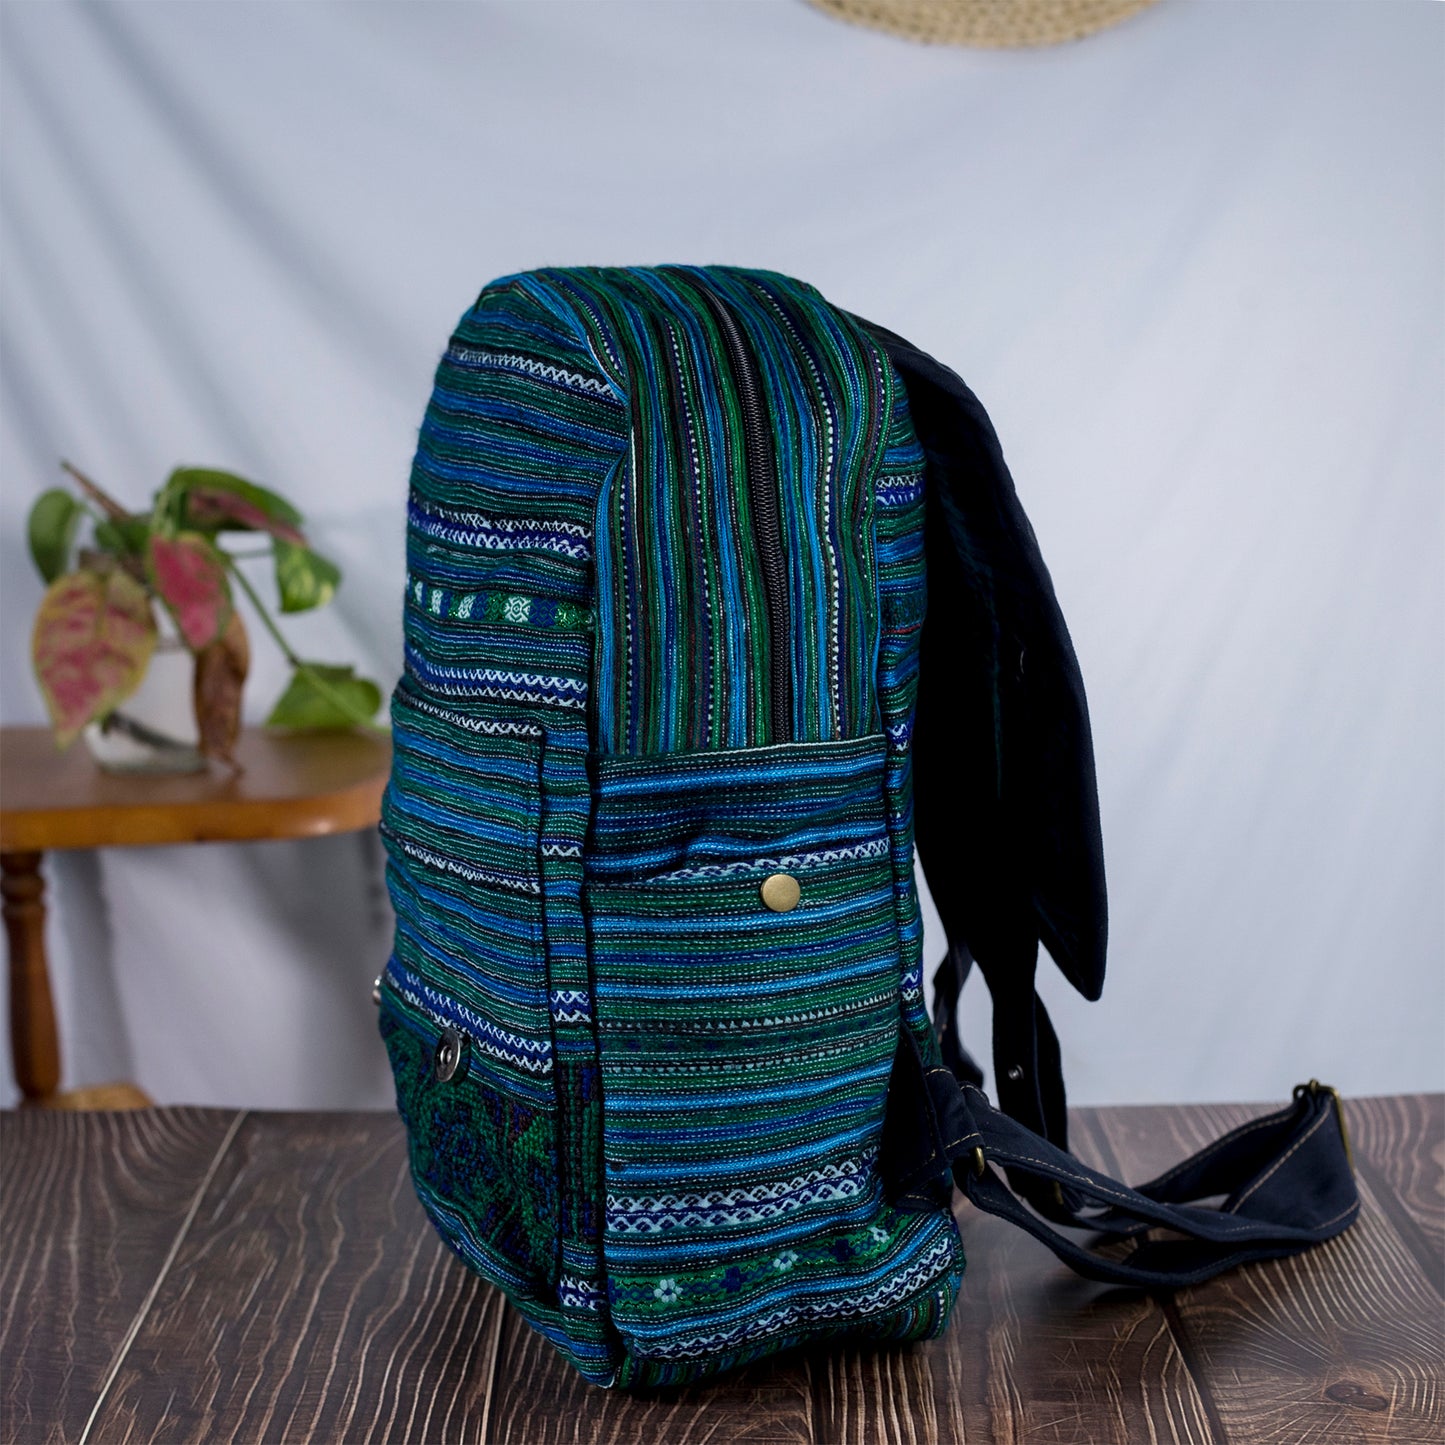 Big-sized backpack, blue hand-embroidery fabric, dark blue faux leather trim